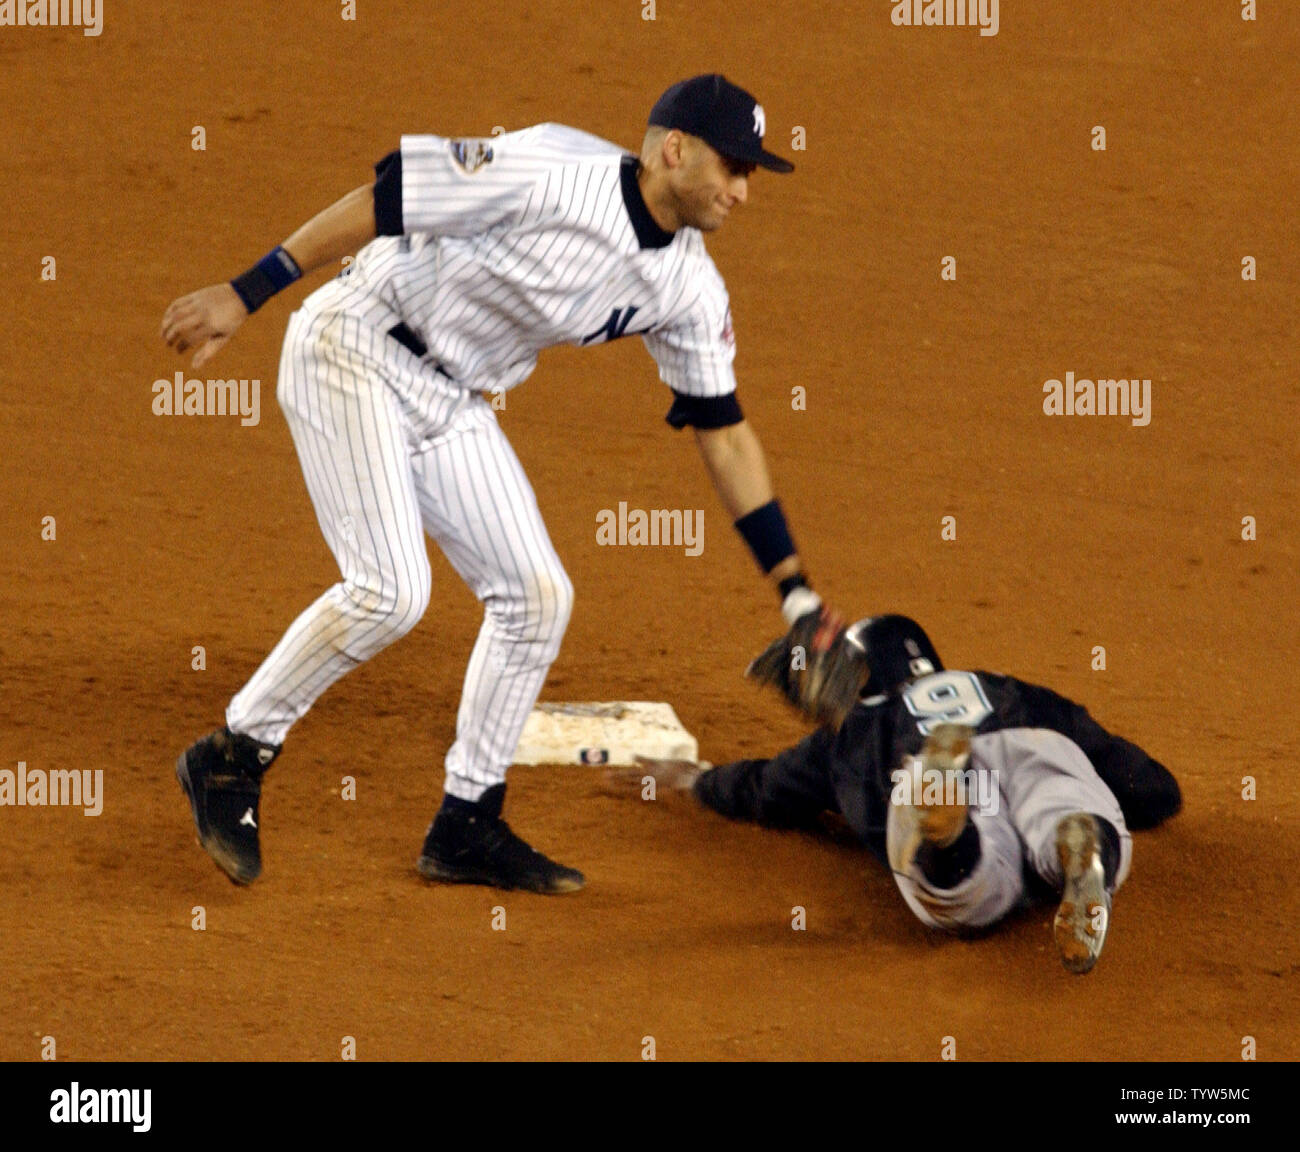 The Florida Marlins' Juan Pierre steals second base as the New York  Yankees' Derek Jeter applies the tag in Game 1 of the World Series at  Yankee Stadium on October 18, 2003.